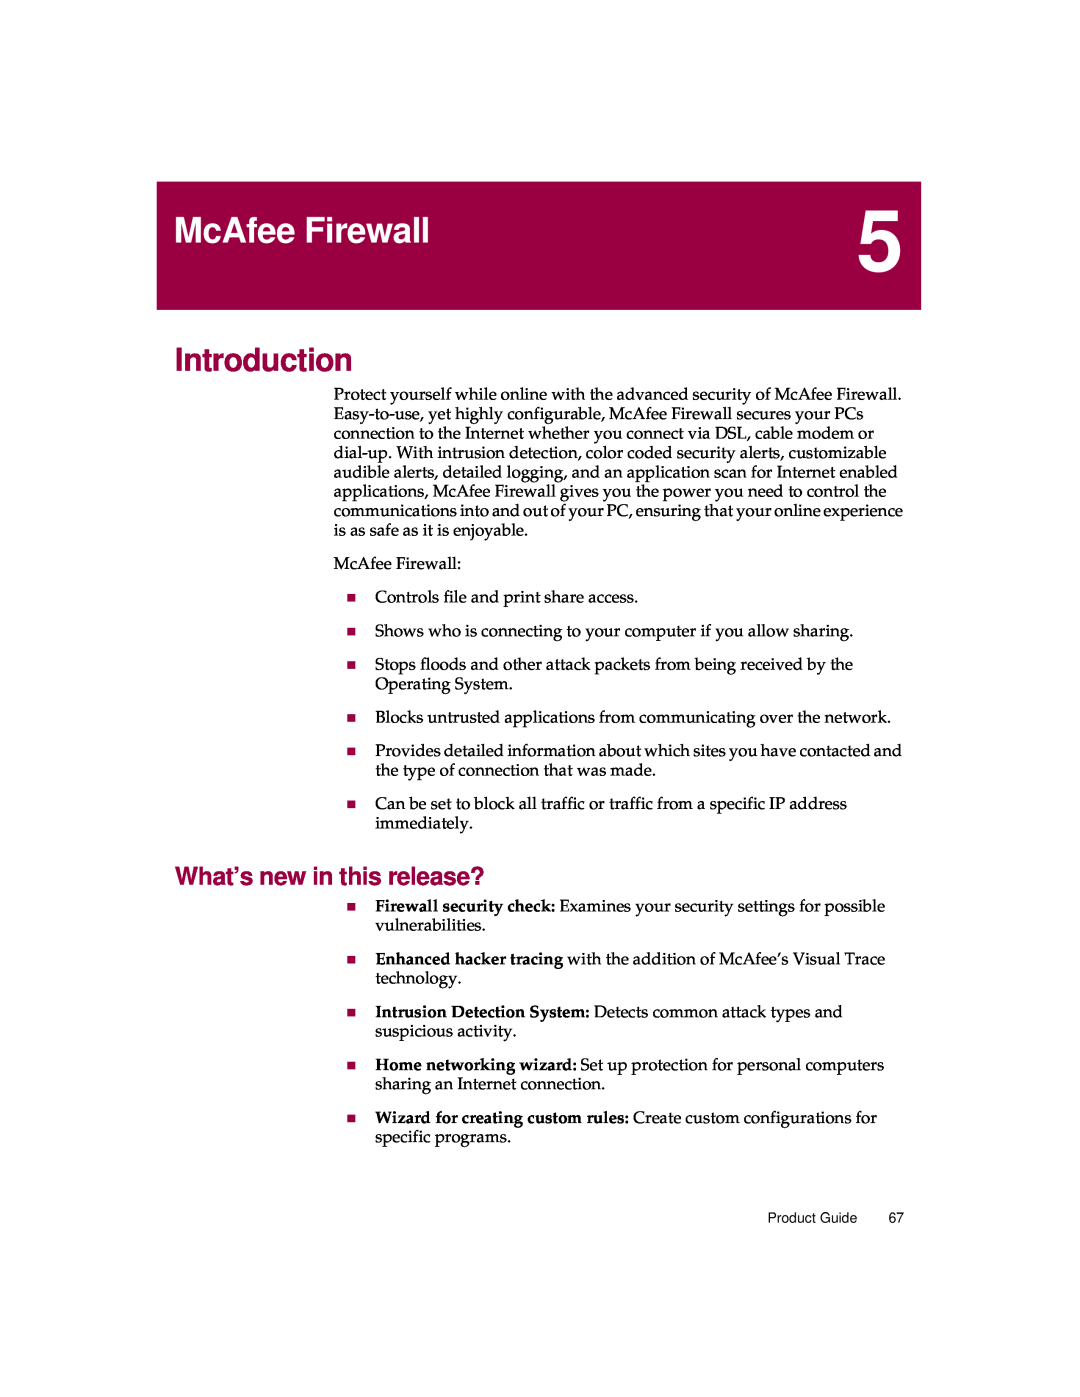 McAfee 5 manual McAfee Firewall, Introduction, What’s new in this release? 